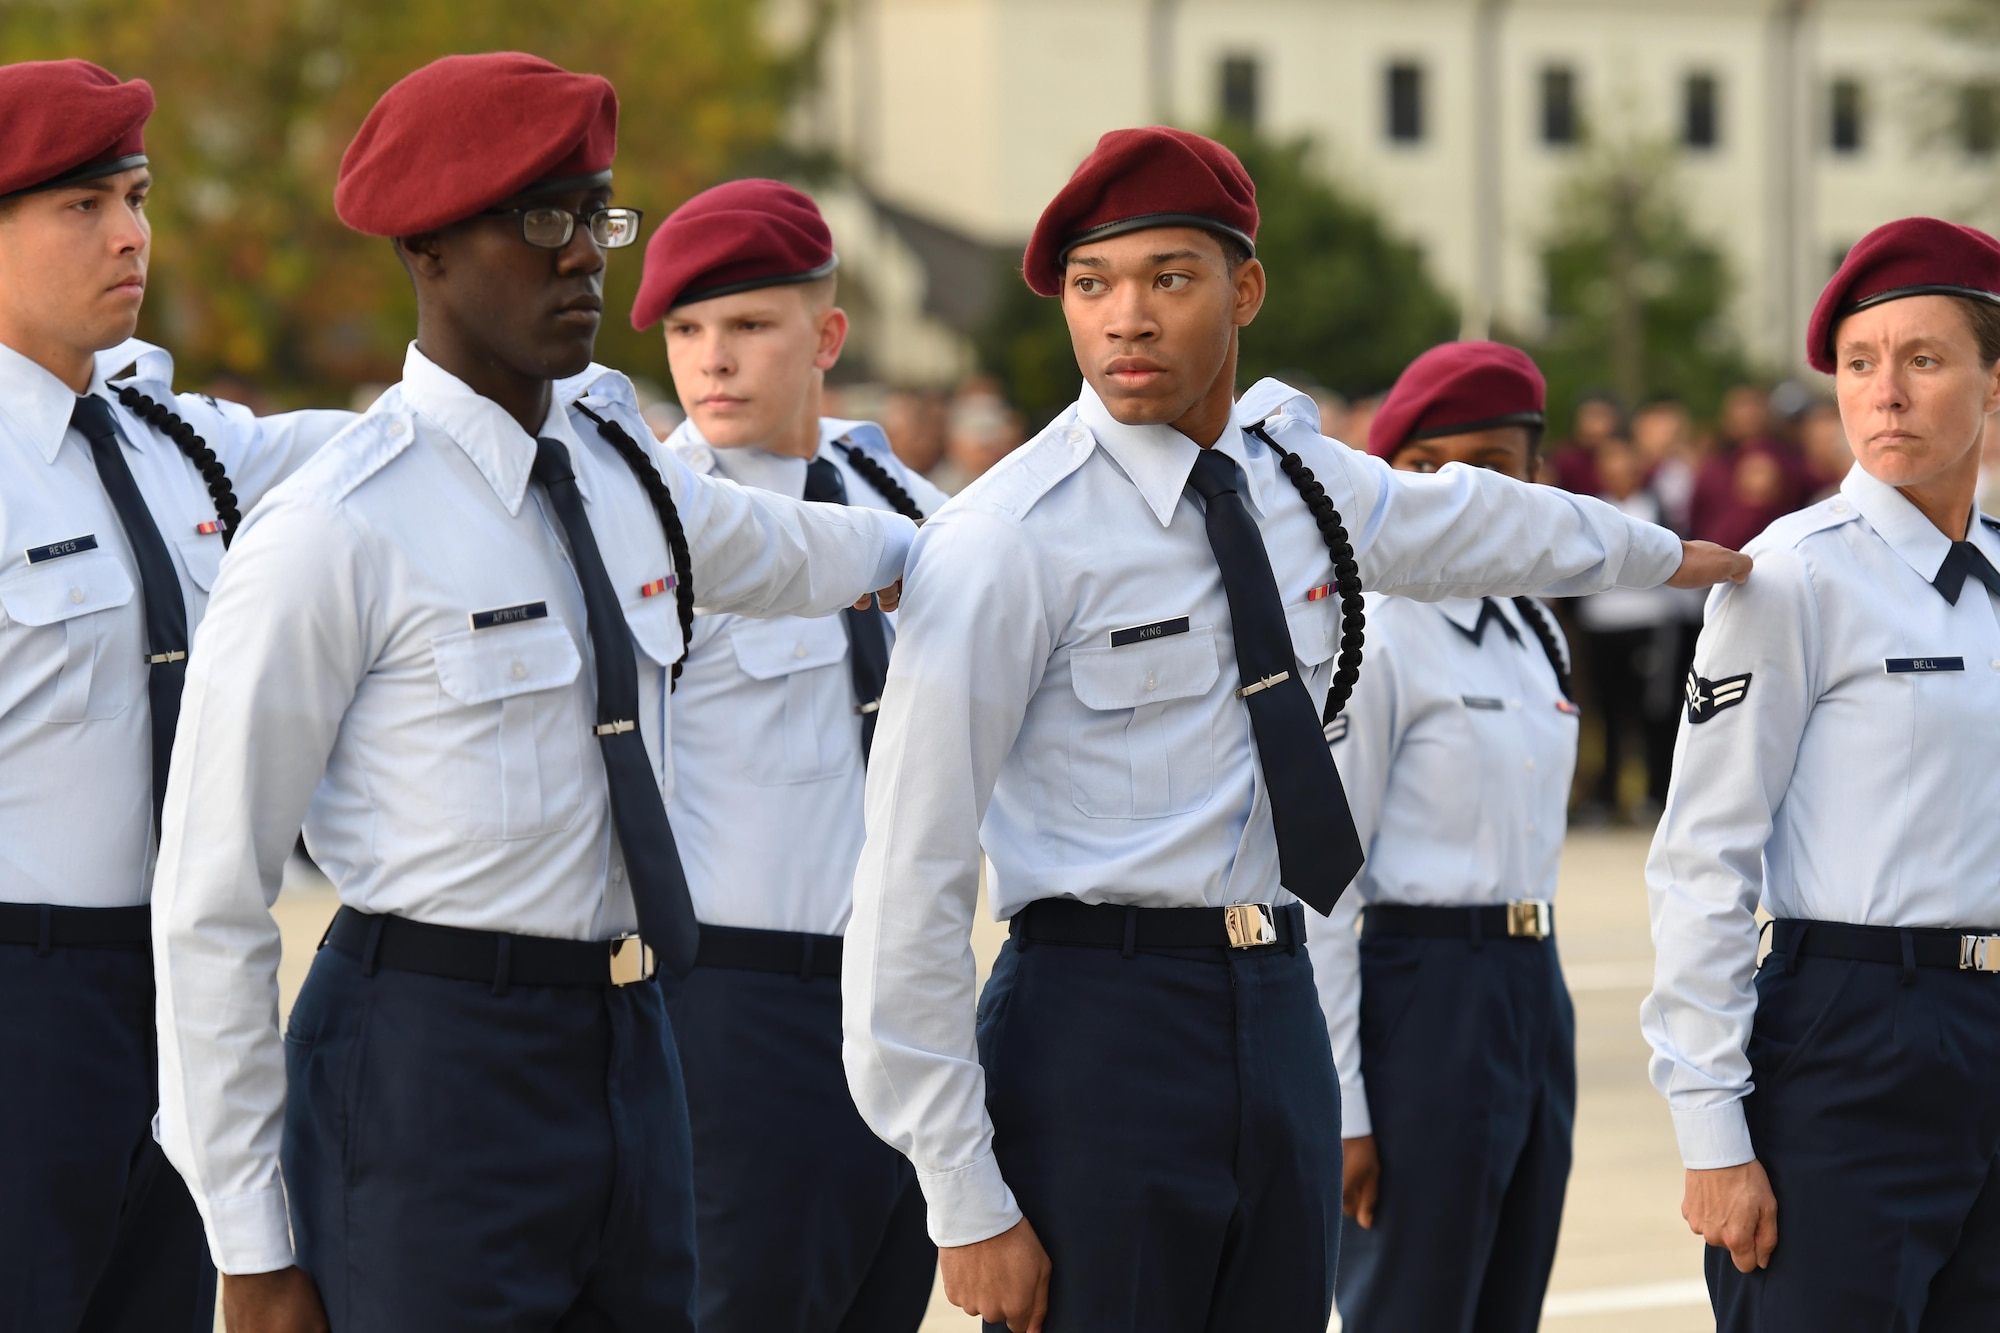 Members of the 335th Training Squadron regulation drill team perform during the 81st Training Group drill down on the Levitow Training Support Facility drill pad at Keesler Air Force Base, Mississippi, Nov. 2, 2018. The 335th TRS "Bulls" took first place overall this quarter and for the year. (U.S. Air Force photo by Kemberly Groue)